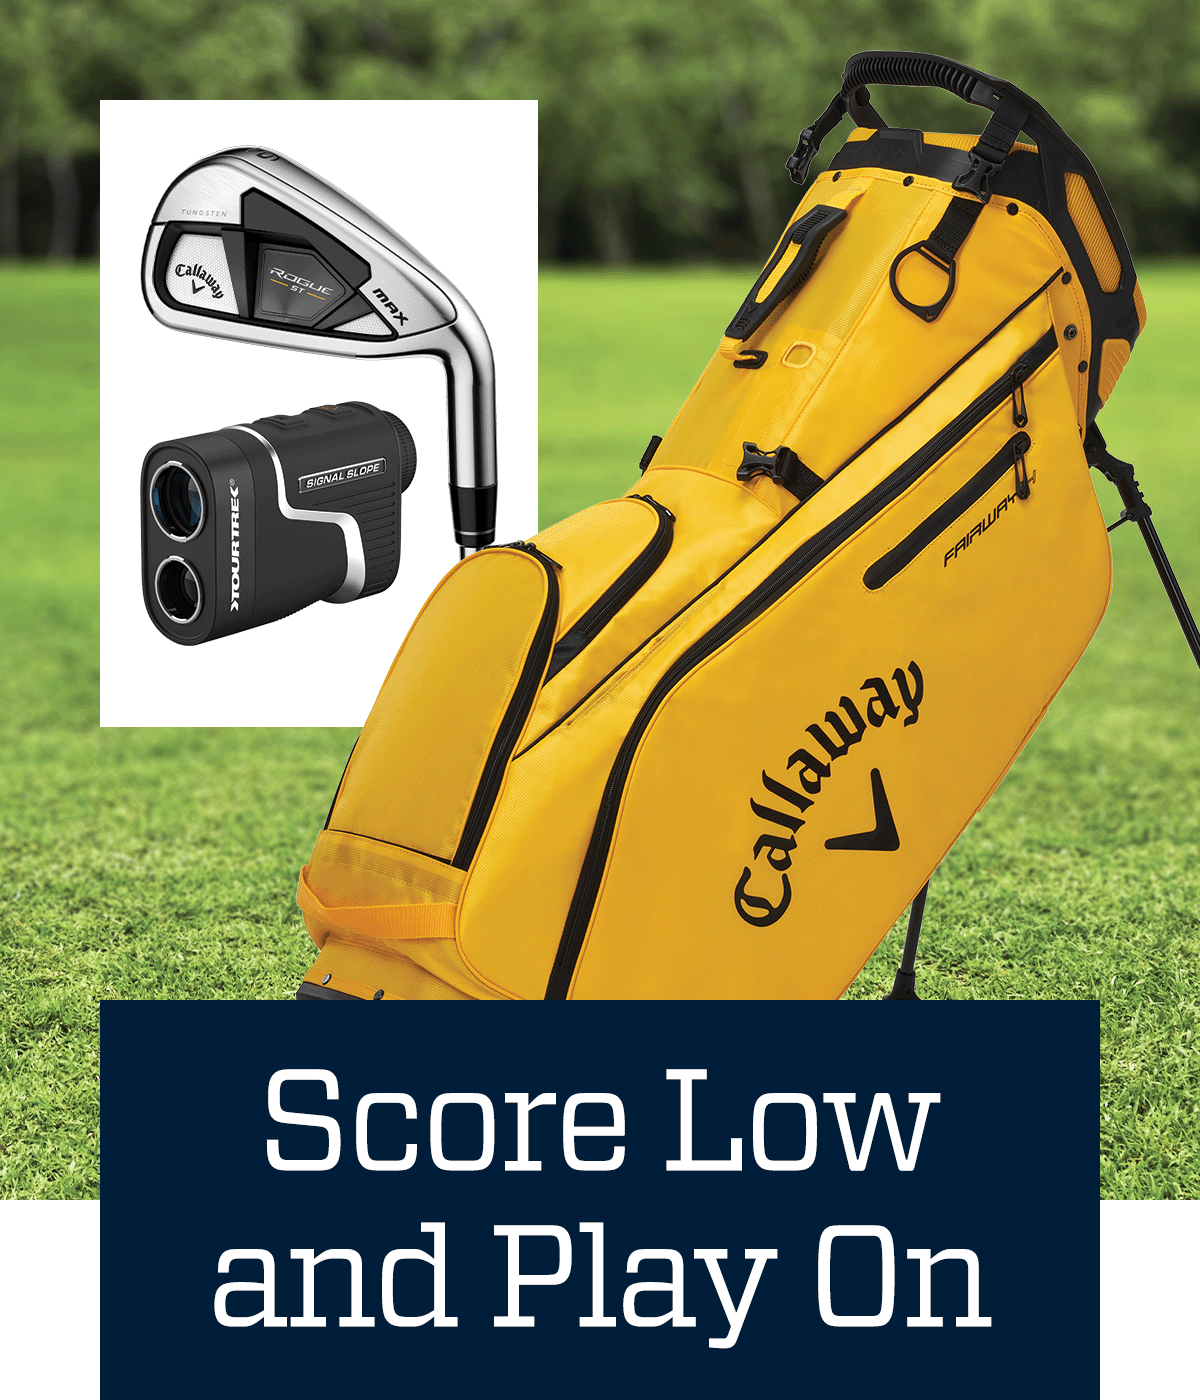 Score low and play on.